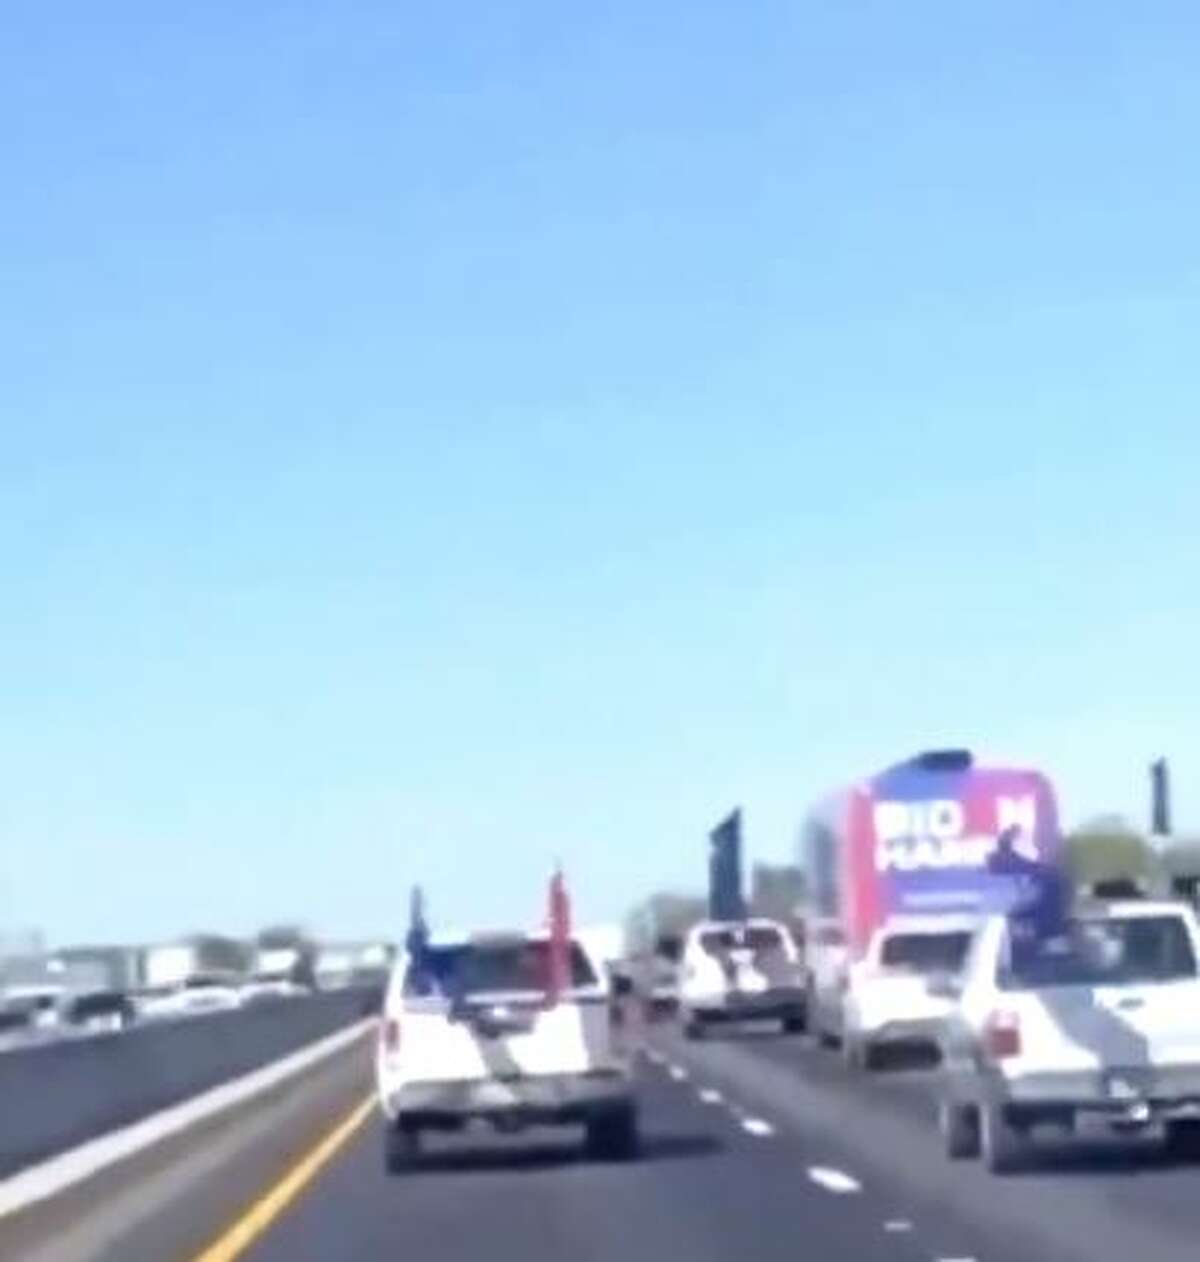 The FBI is now investigating the alleged harassment of a Joe Biden campaign bus which was surrounded by a caravan of cars and trucks displaying Trump 2020 flags on Friday near Pflugerville, Texas, an FBI spokesperson confirmed.